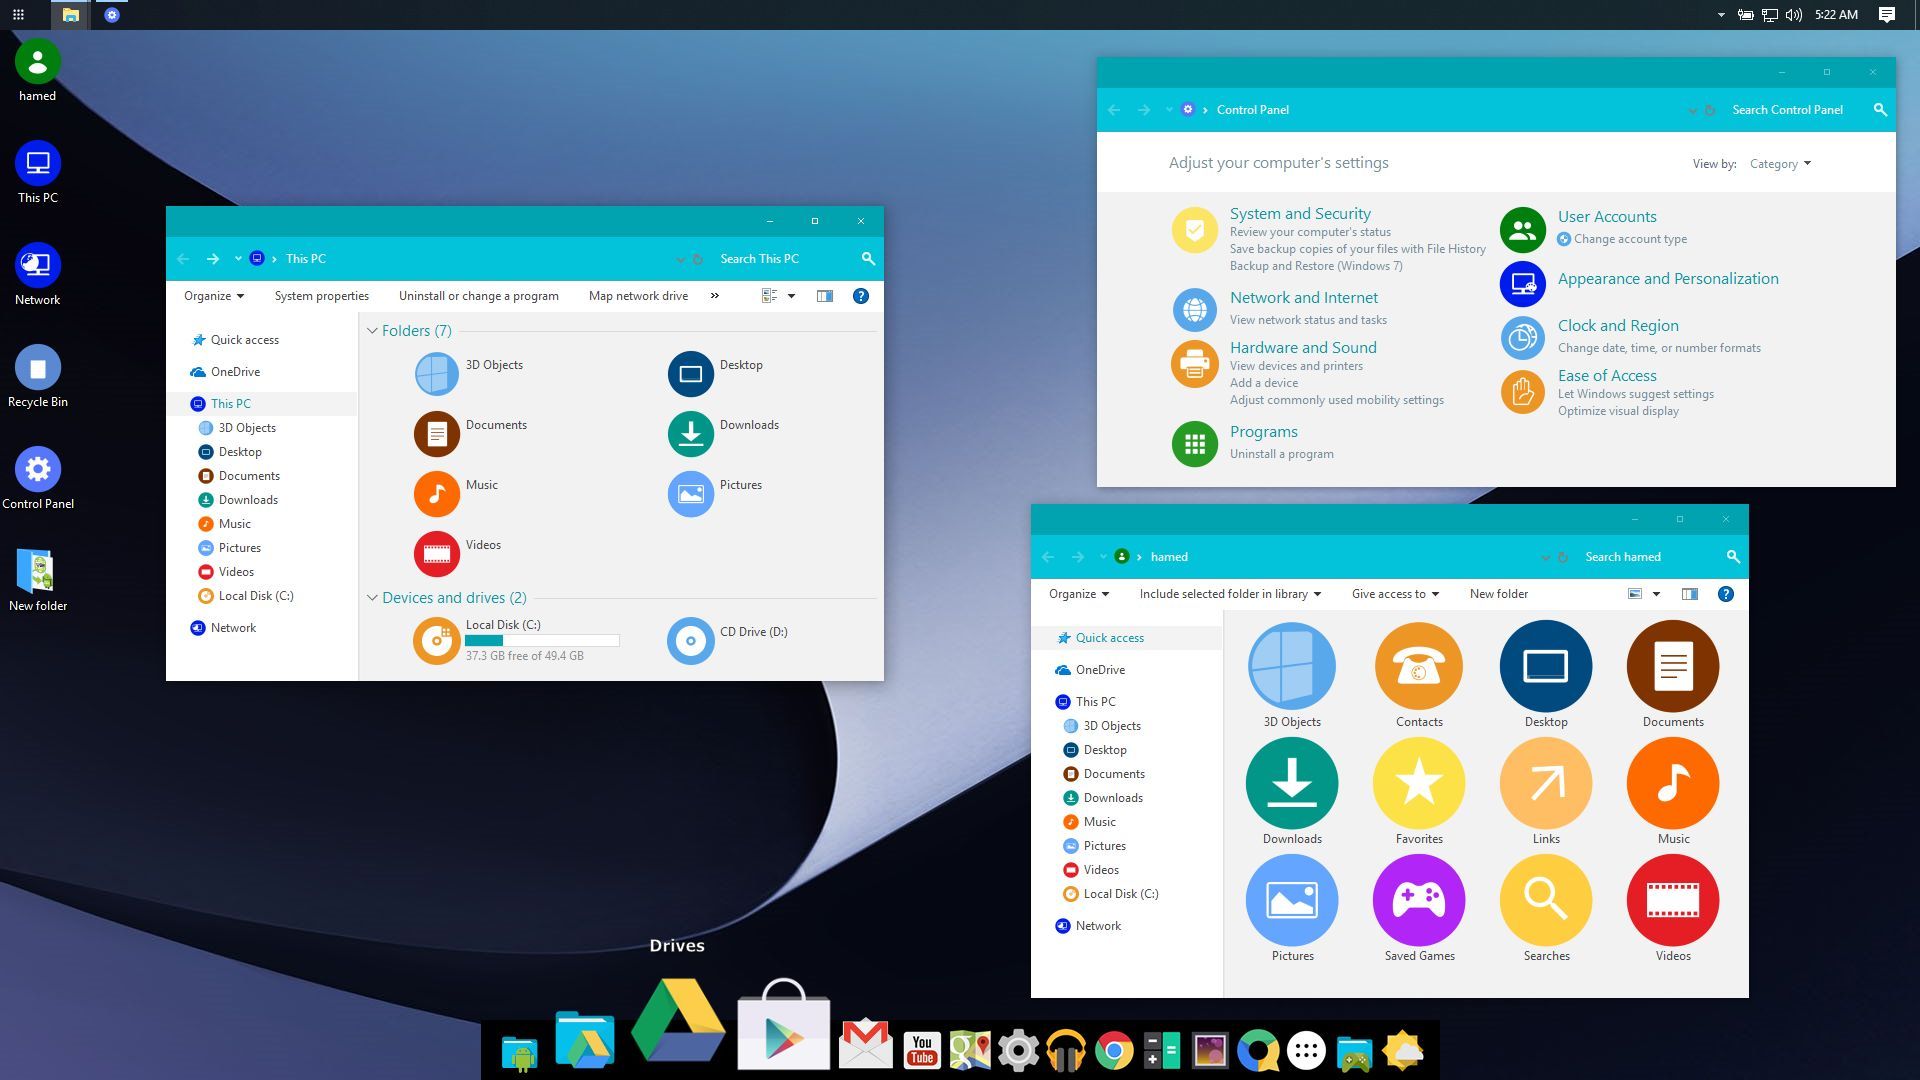 Android Pie SkinPack for Windows 7\8.1\10 19H1|19H2|20H1